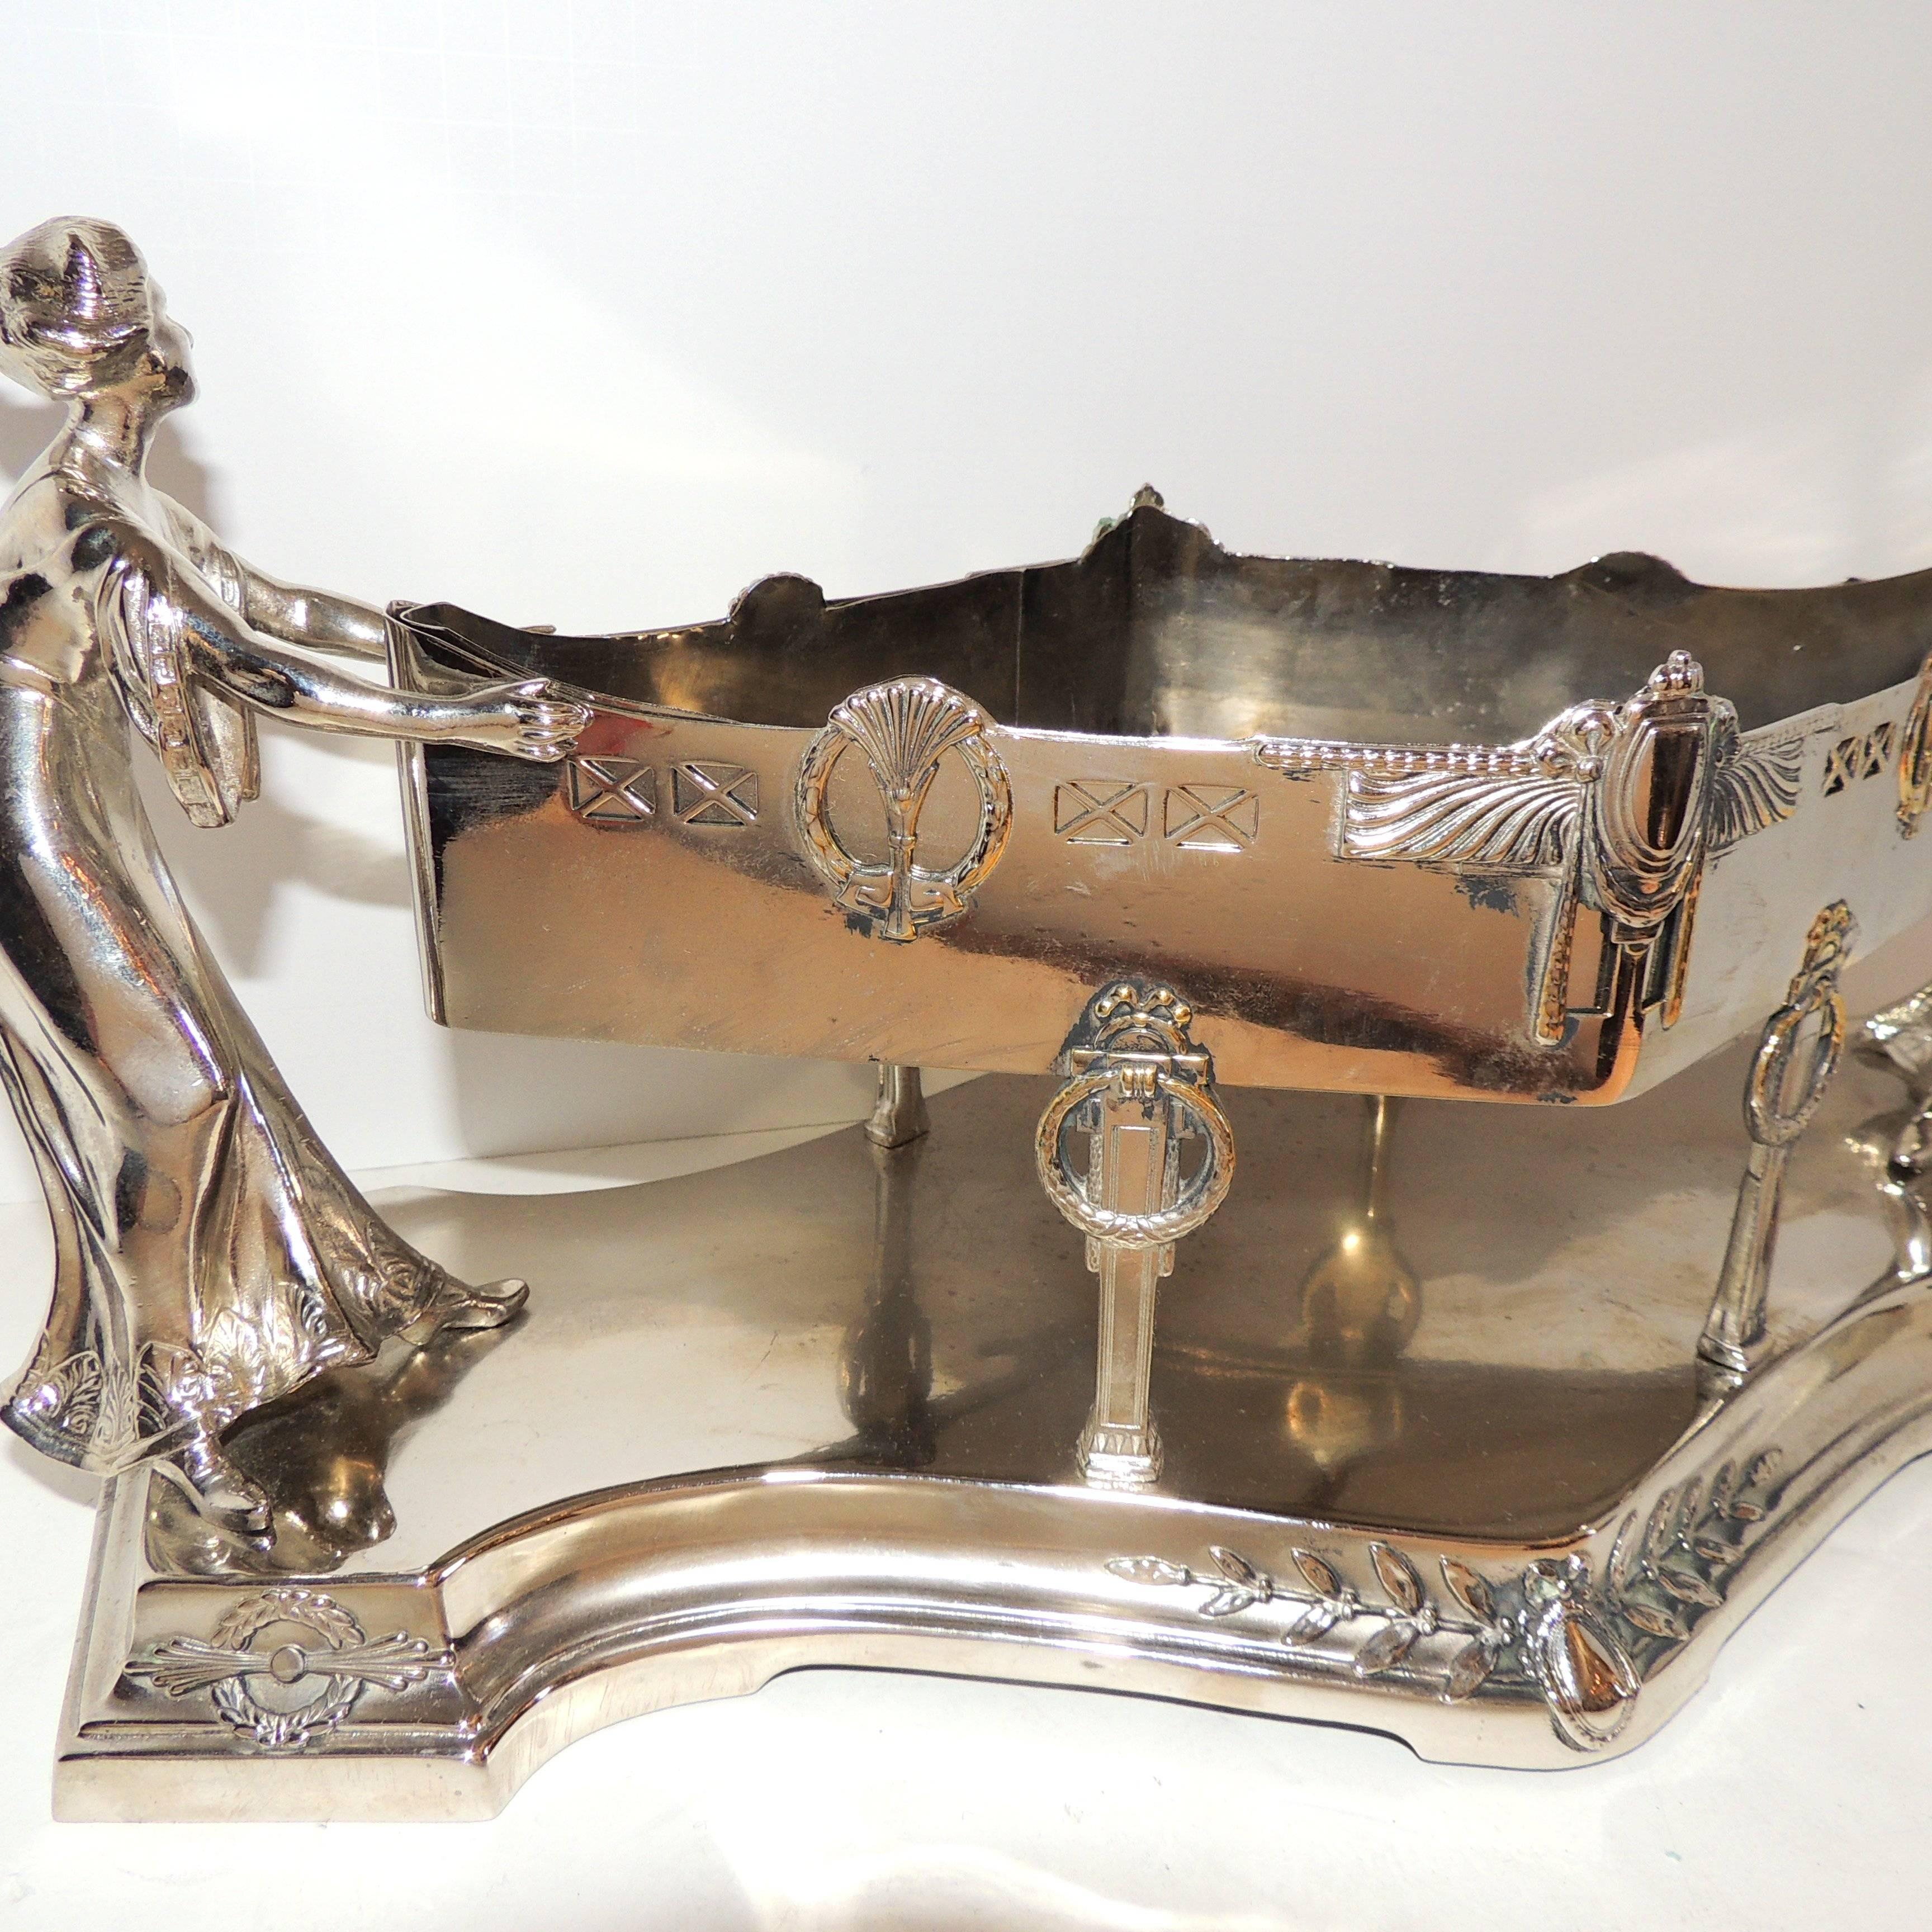 French Fine Art Deco Silver Plated Argentor WMF Lady Figural Centerpiece Planter Insert For Sale